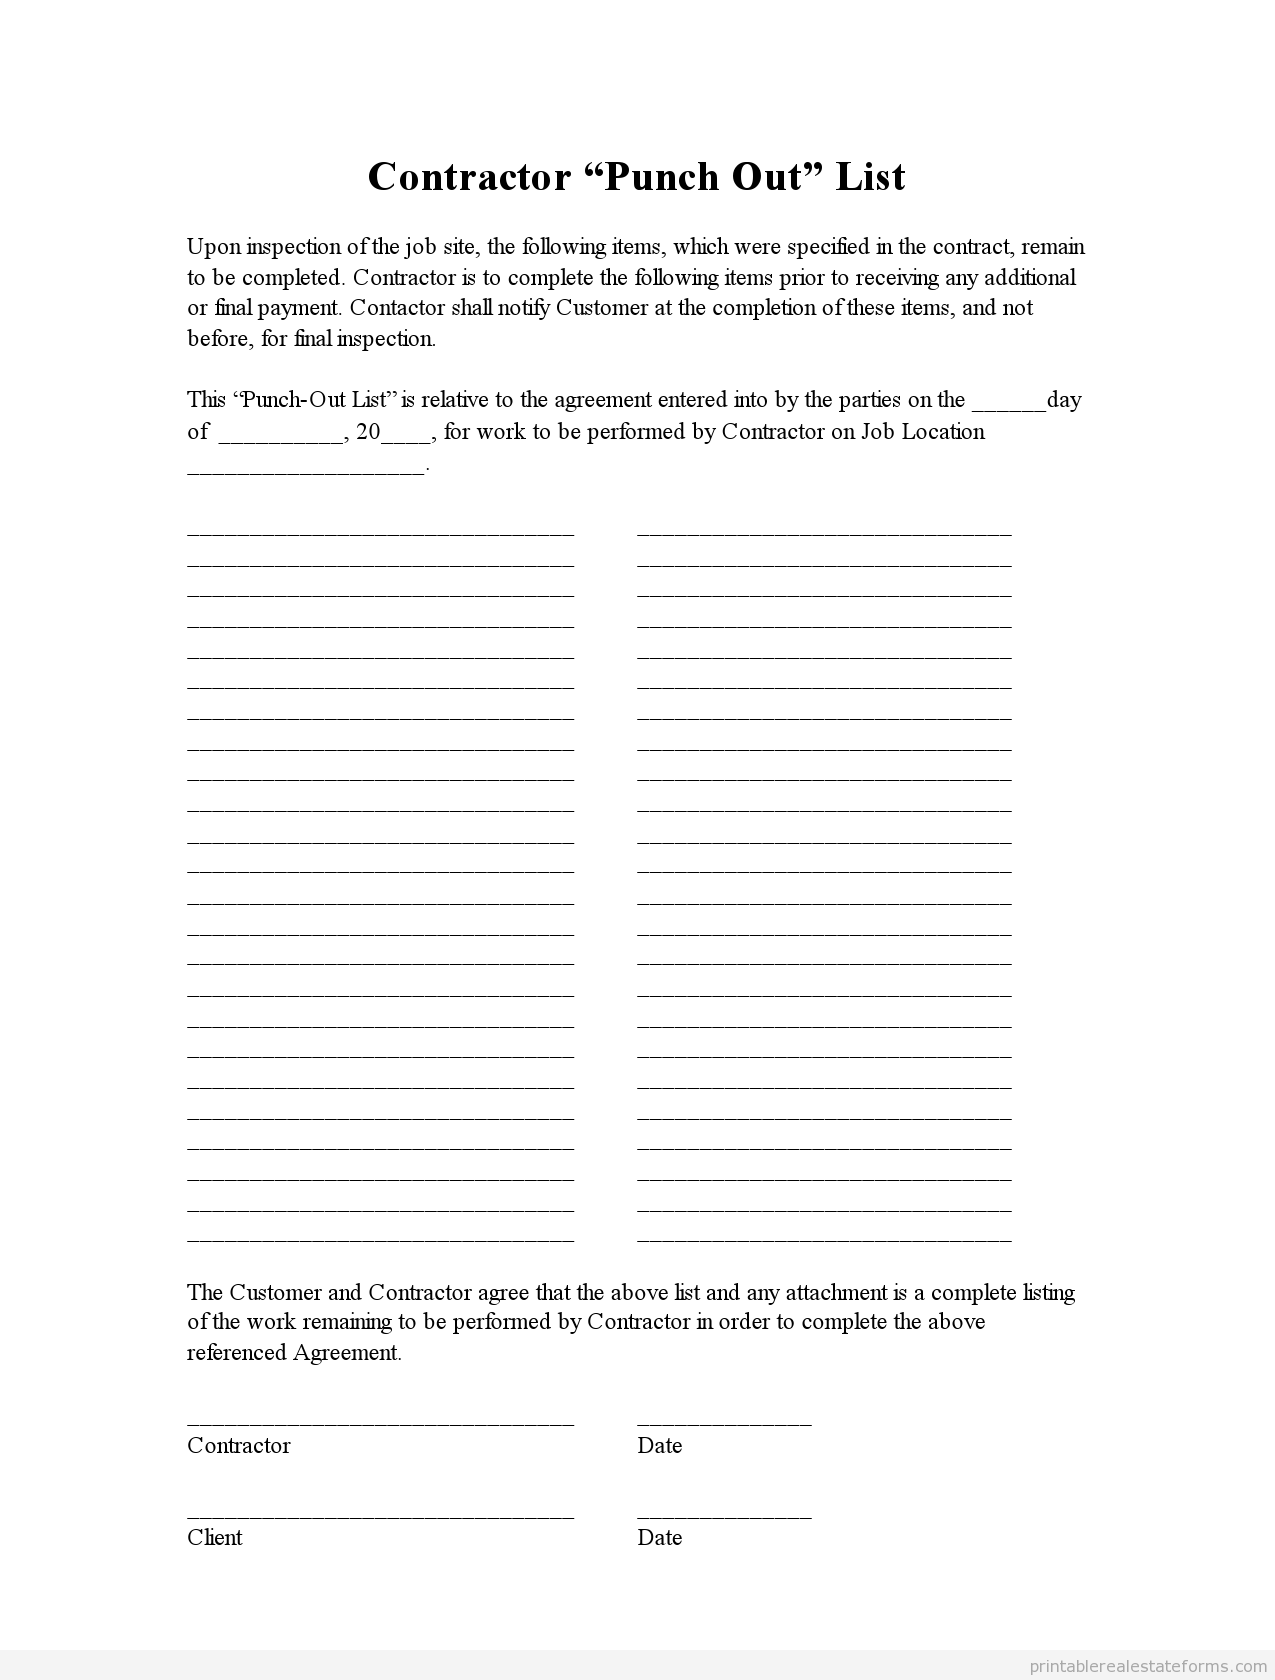 Construction Punch List Template from www.printablerealestateforms.com